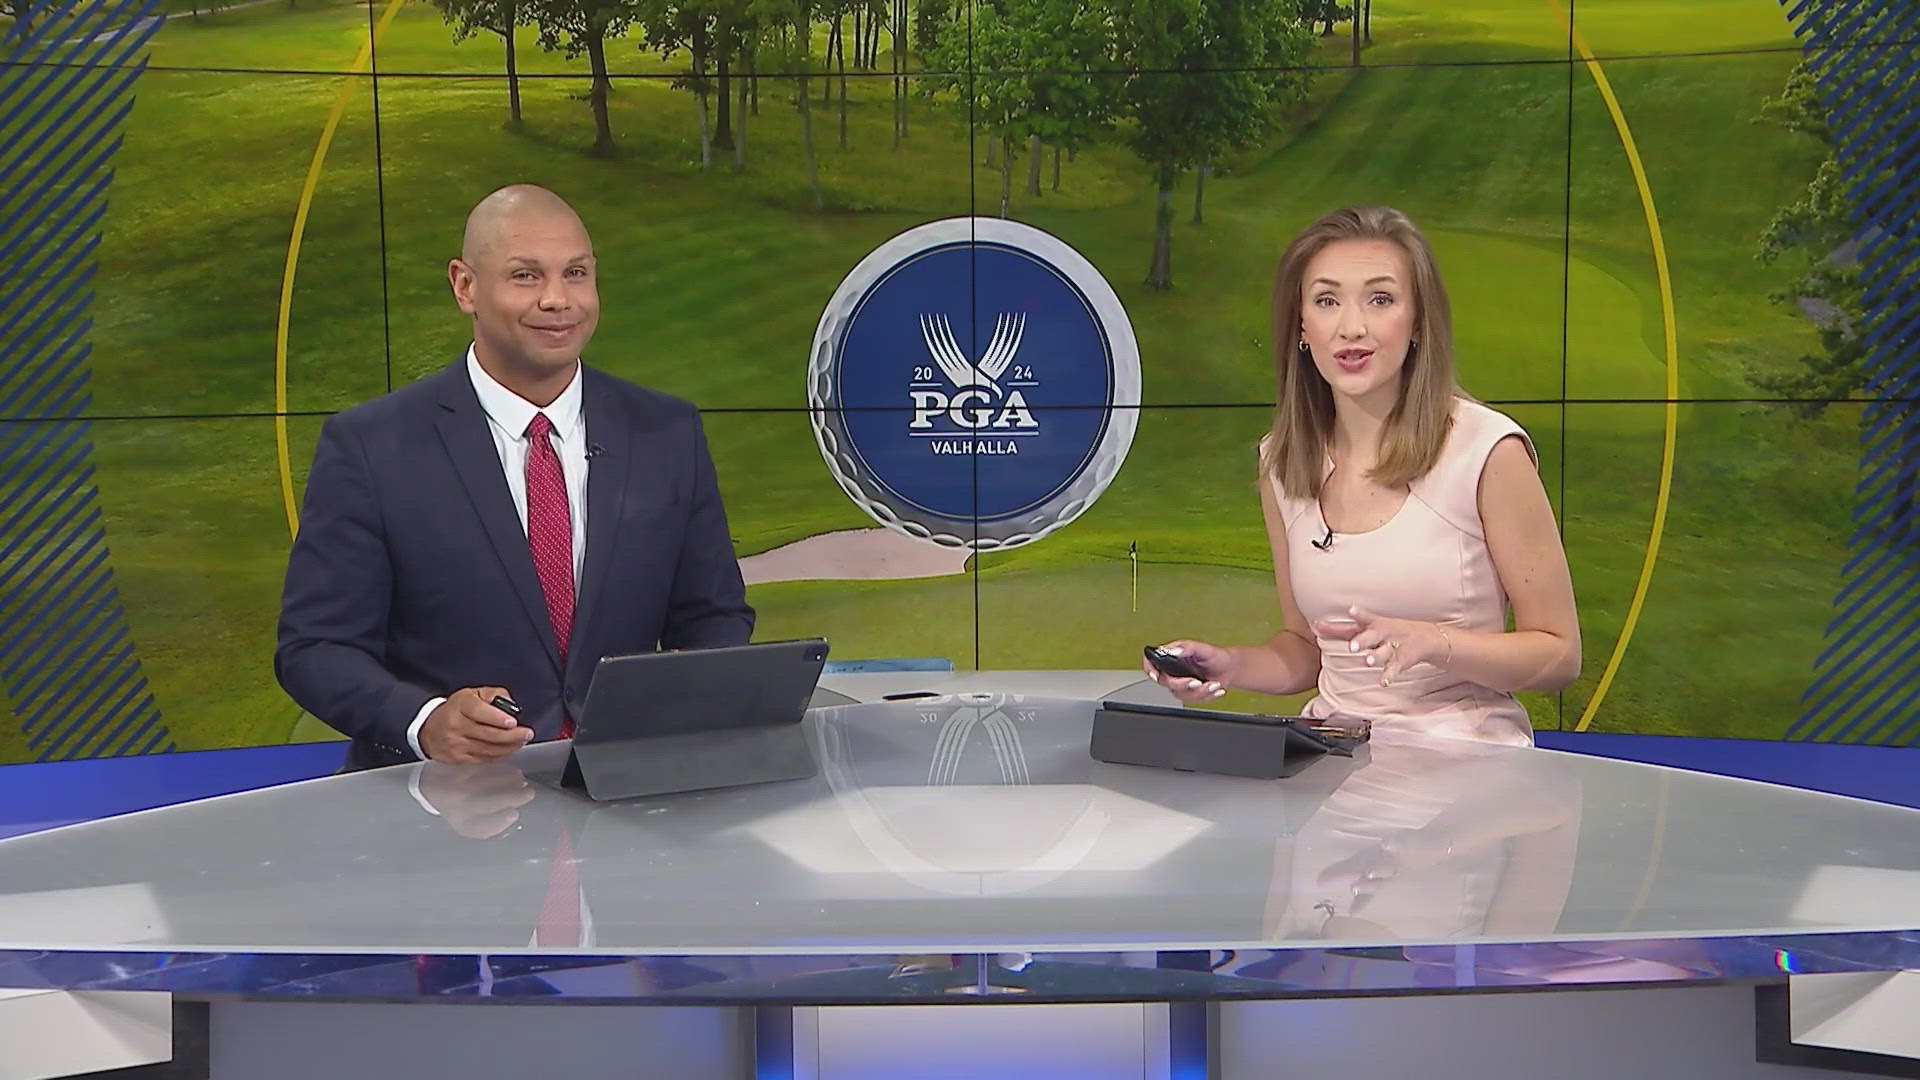 WHAS11's Grace McKenna and Eric King are quizzed on golf terms.